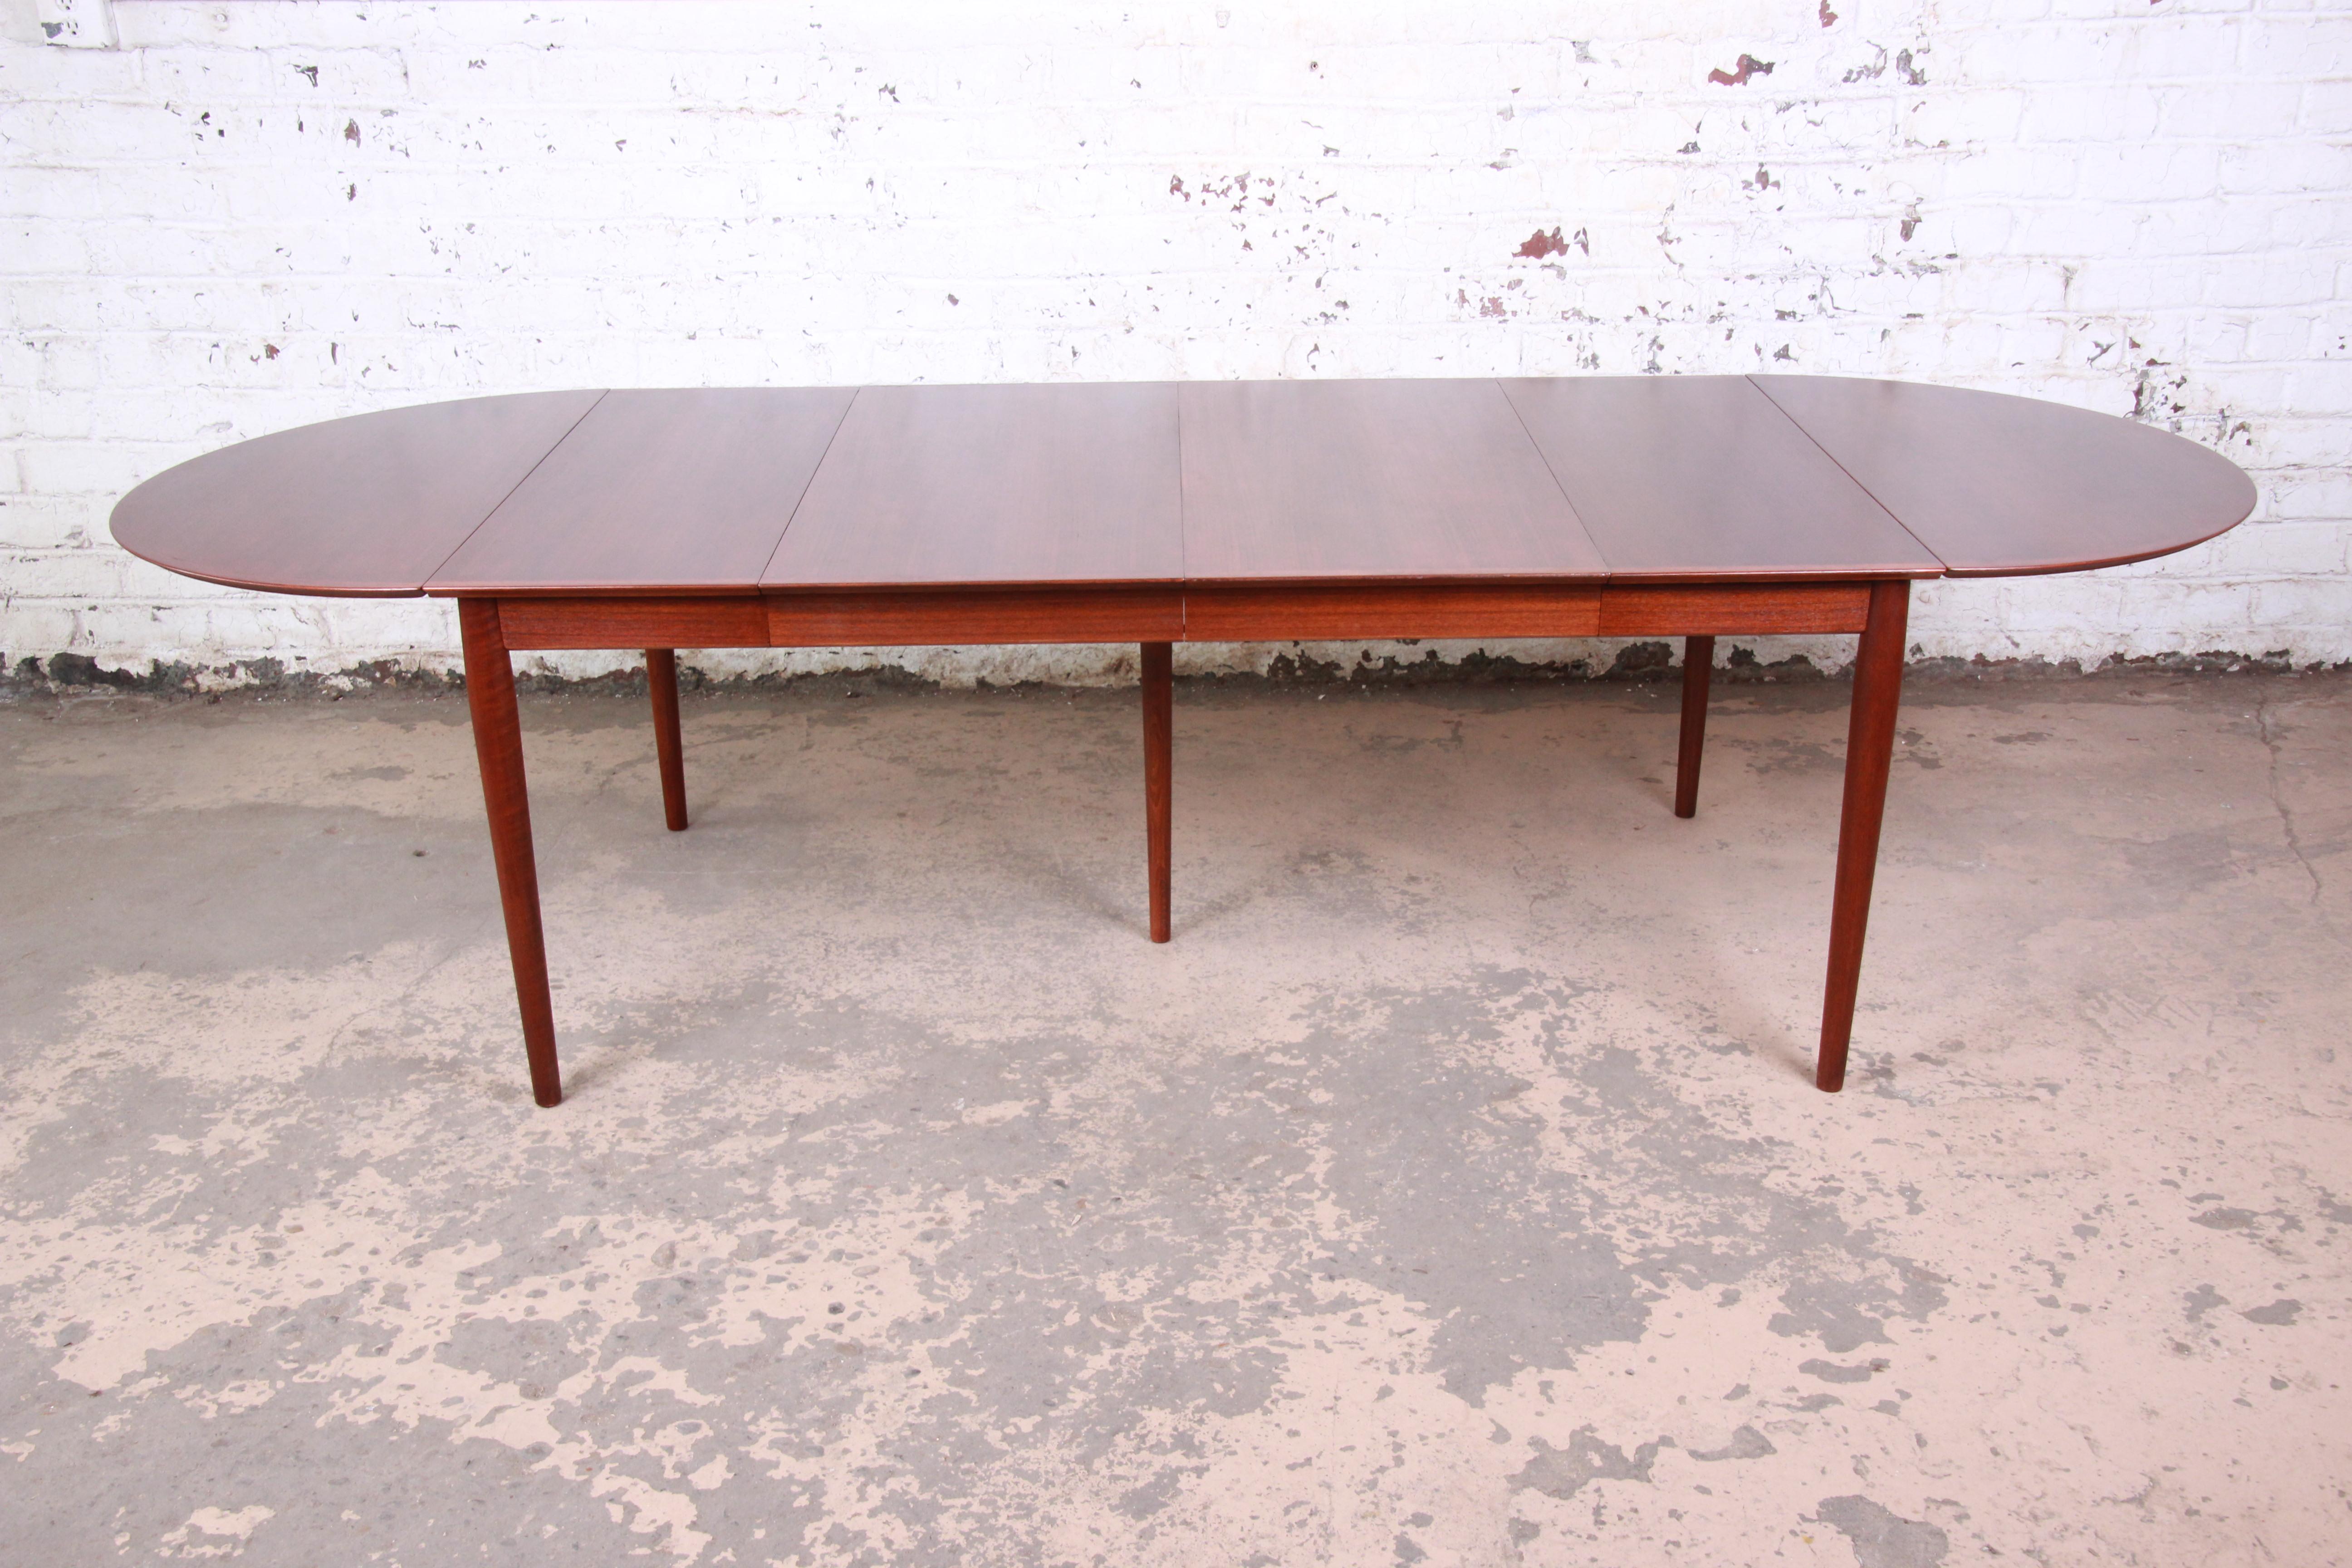 An exceptional Minimalist midcentury Danish Modern teak extension dining table. Very versatile, with drop leaves and two extension leaves.

By Arne Vodder for Sibast Møbler

Denmark, circa 1960s

Measures:
Leaves down with no extensions - 33